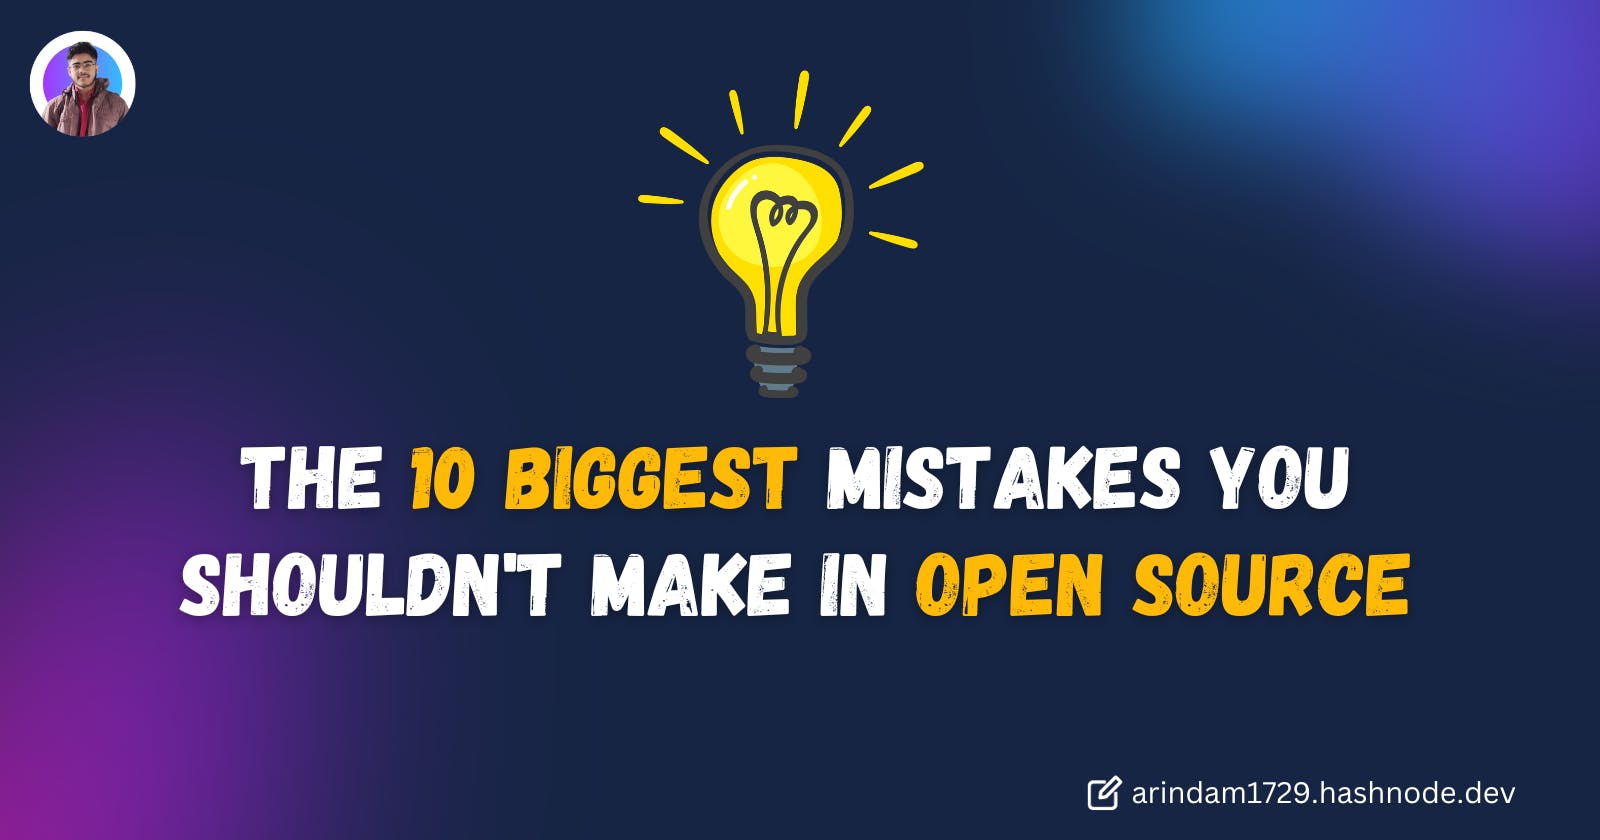 The 10 Biggest Mistakes you shouldn't make in Open Source